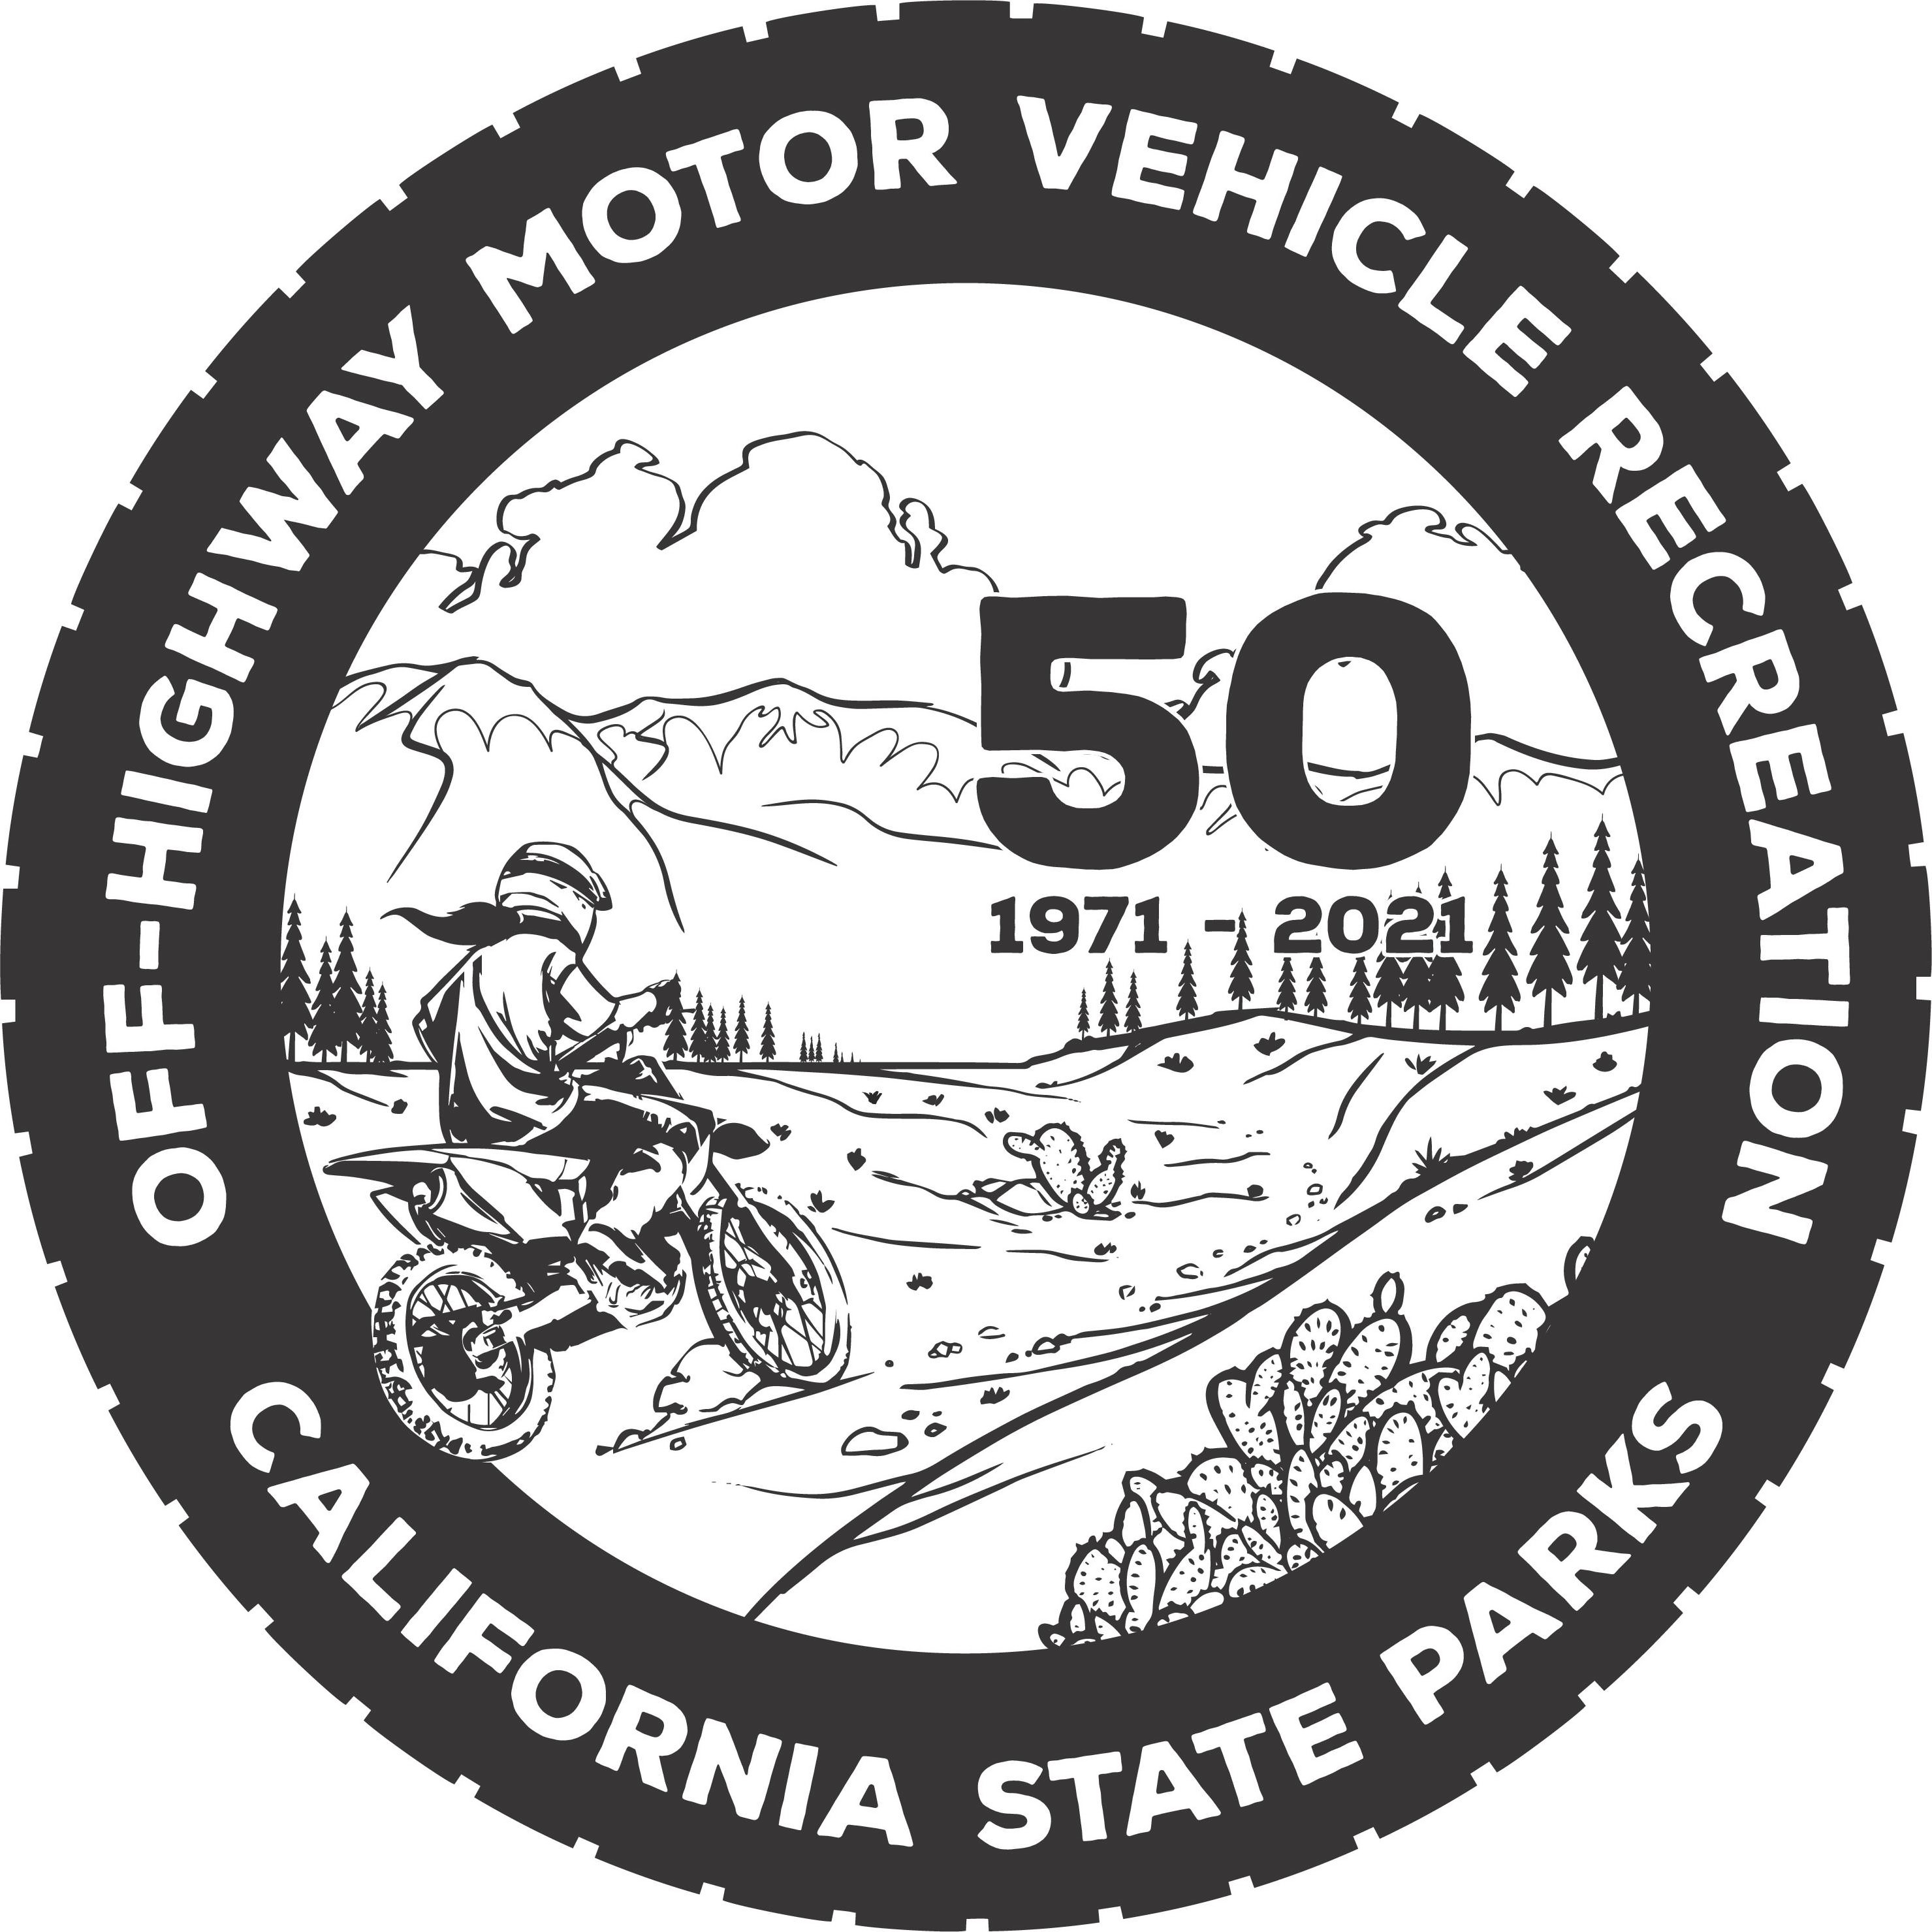  OFF-HIGHWAY MOTOR VEHICLE RECREATION CALIFORNIA STATE PARKS 50 1971-2021